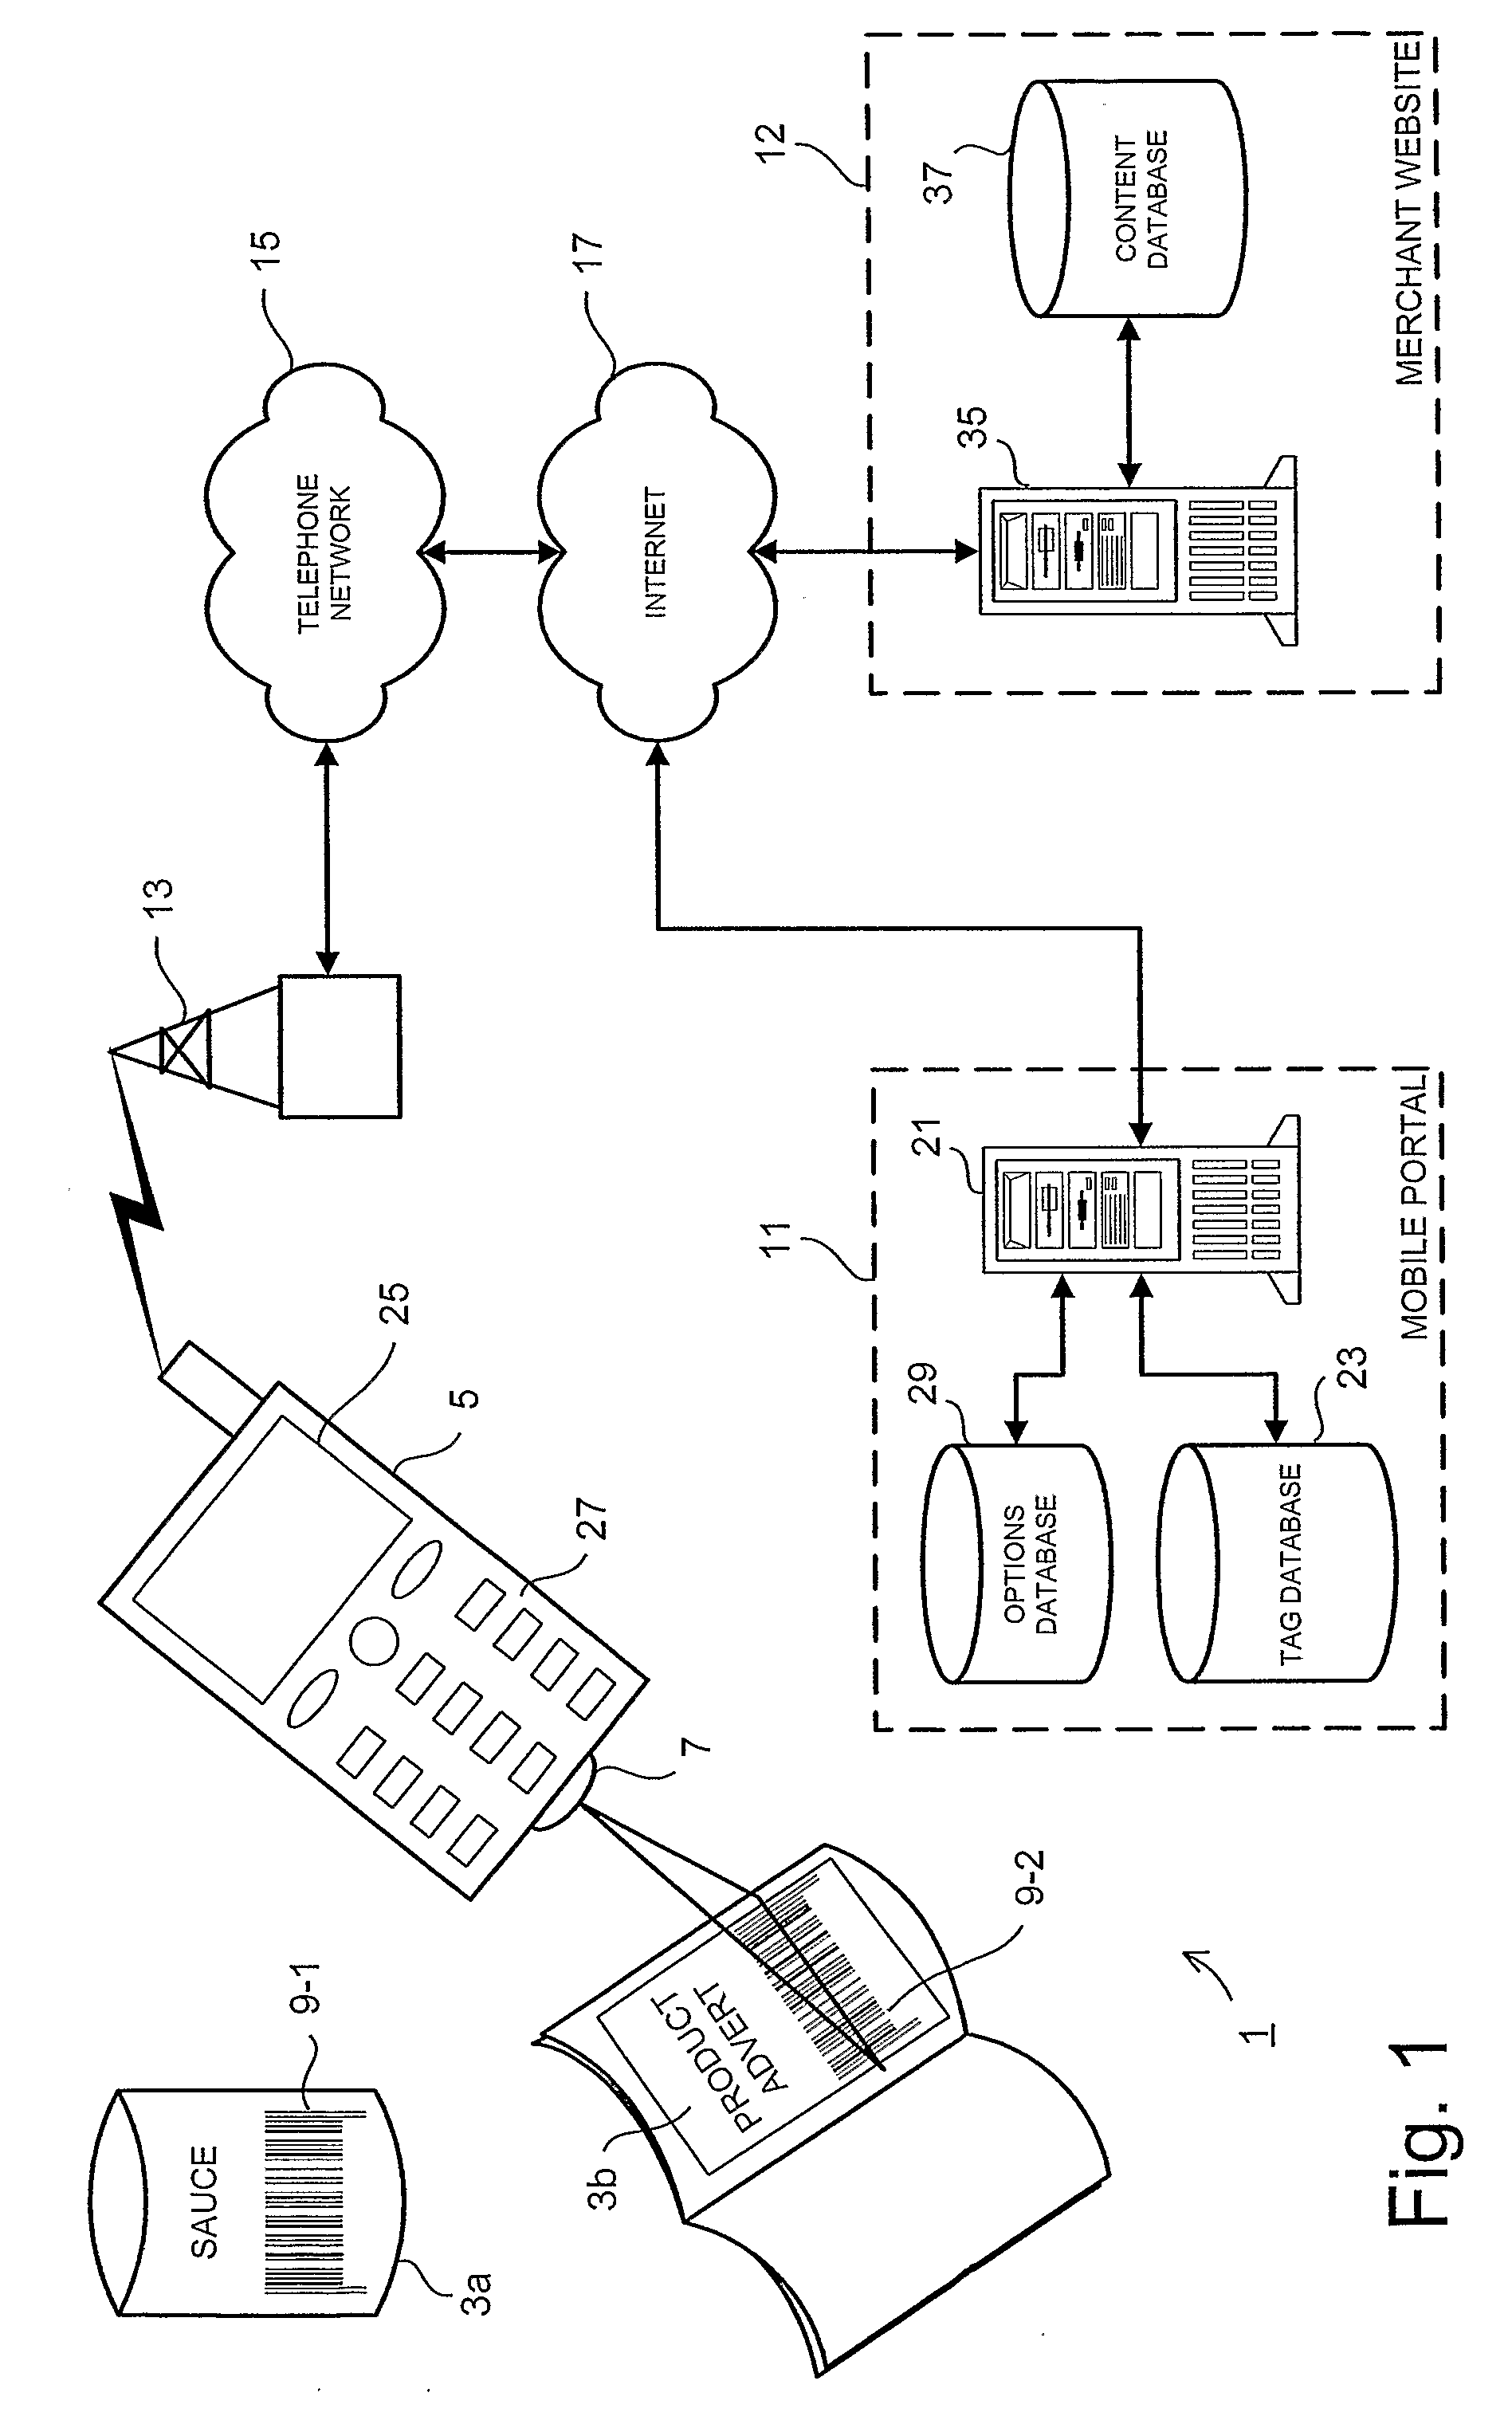 Mobile Information Processing System